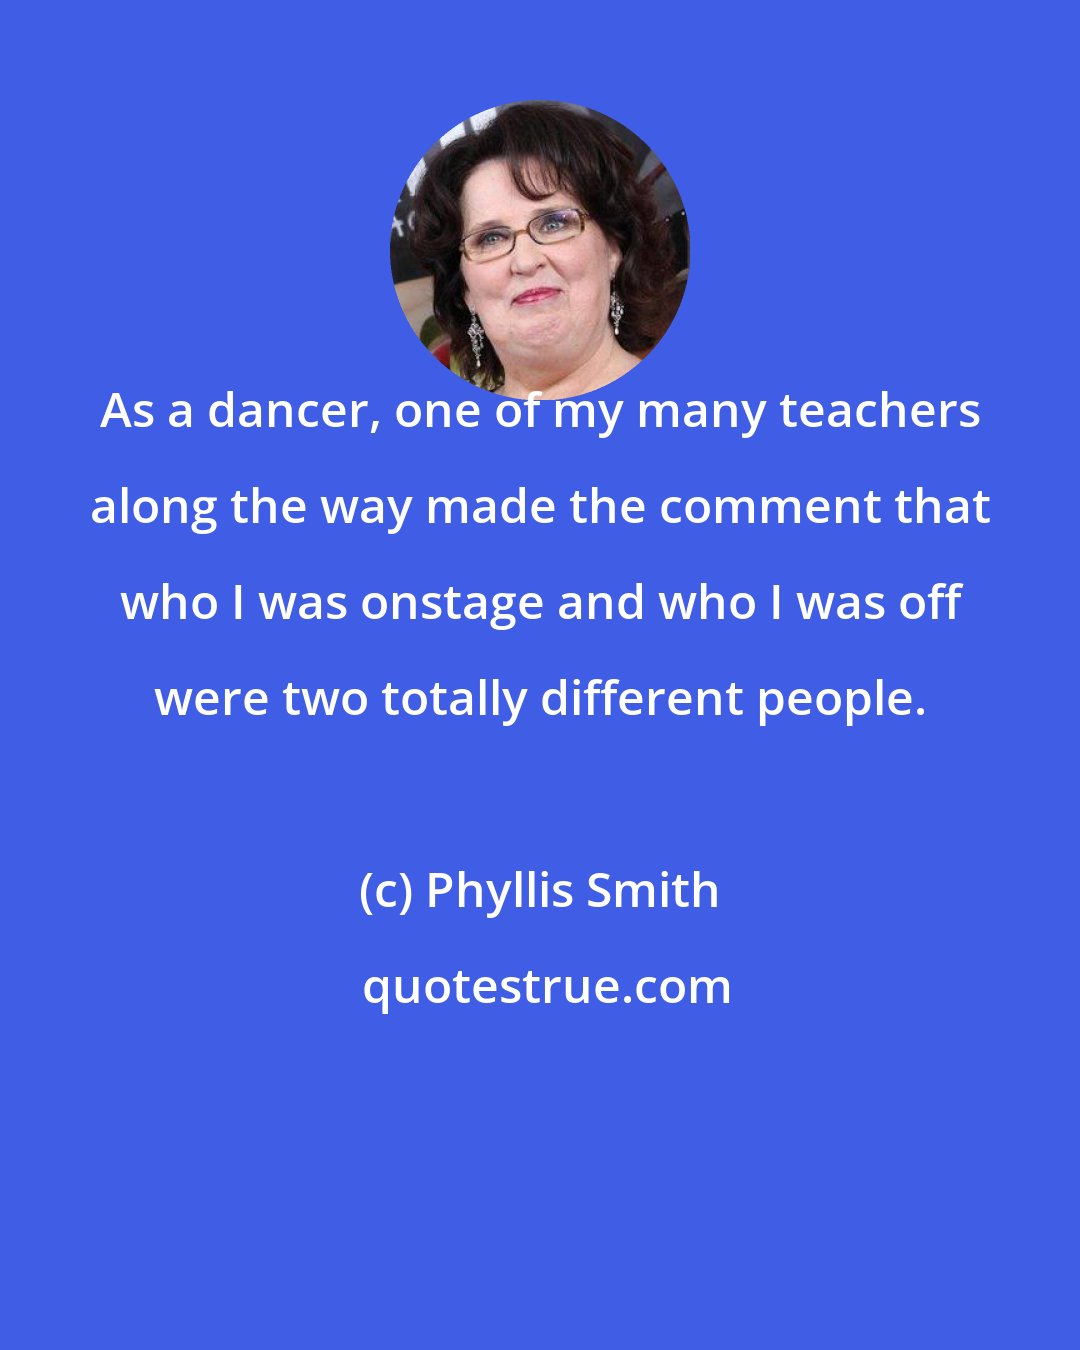 Phyllis Smith: As a dancer, one of my many teachers along the way made the comment that who I was onstage and who I was off were two totally different people.